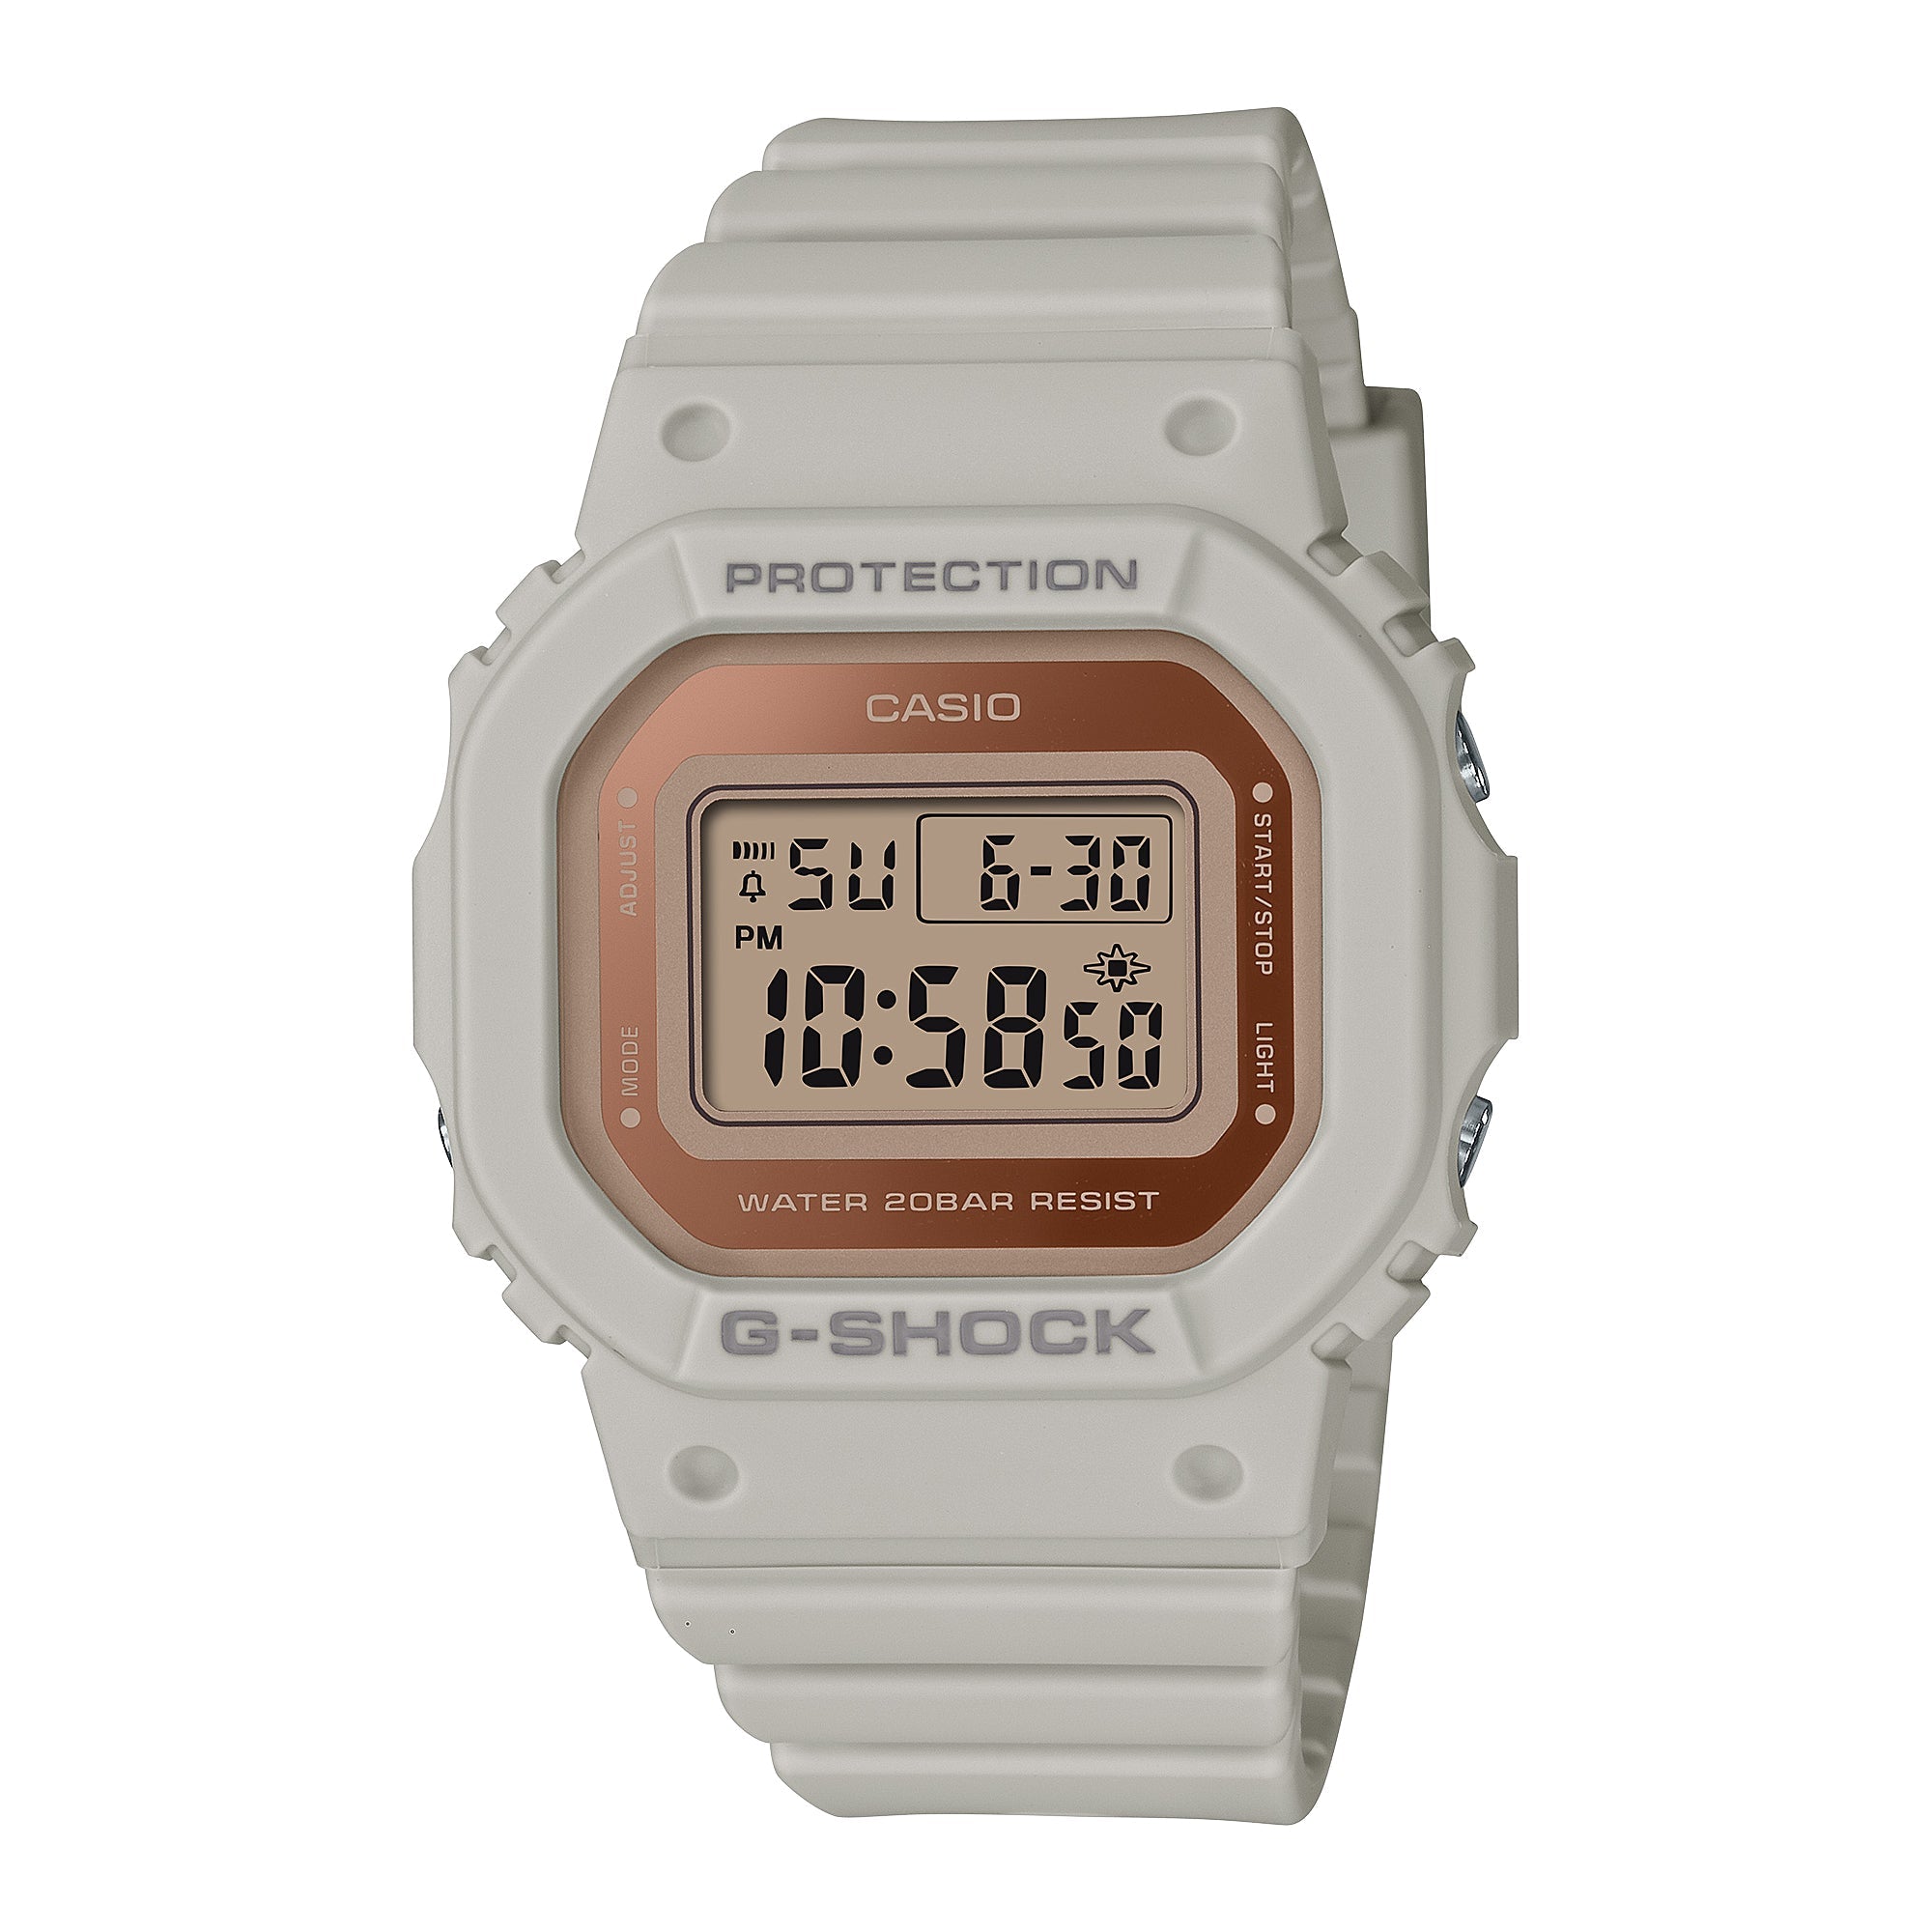 Casio G-Shock for Ladies' Iconic 5600 Series Lineup Light Grey Resin Band Watch GMDS5600-8D GMD-S5600-8D GM-DS5600-8 Watchspree